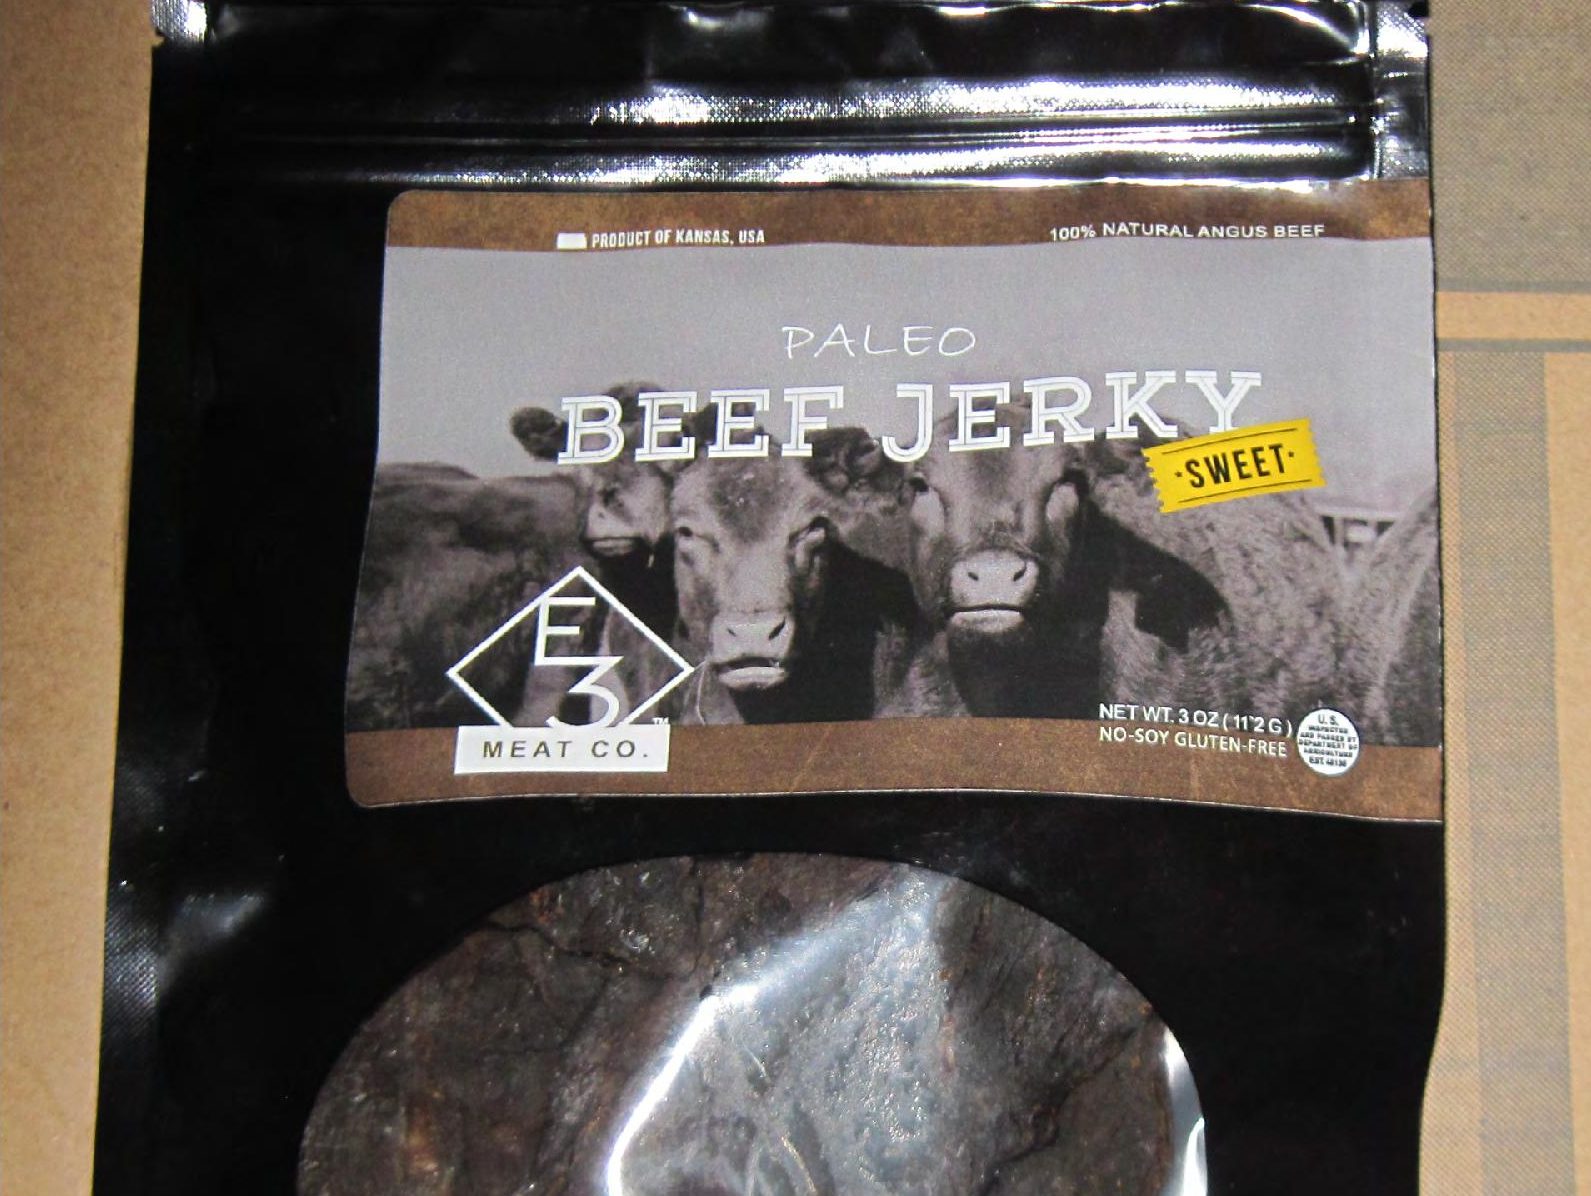 Flavor Trade, LLC. Recalls Beef Products Produced Without Benefit of Inspection